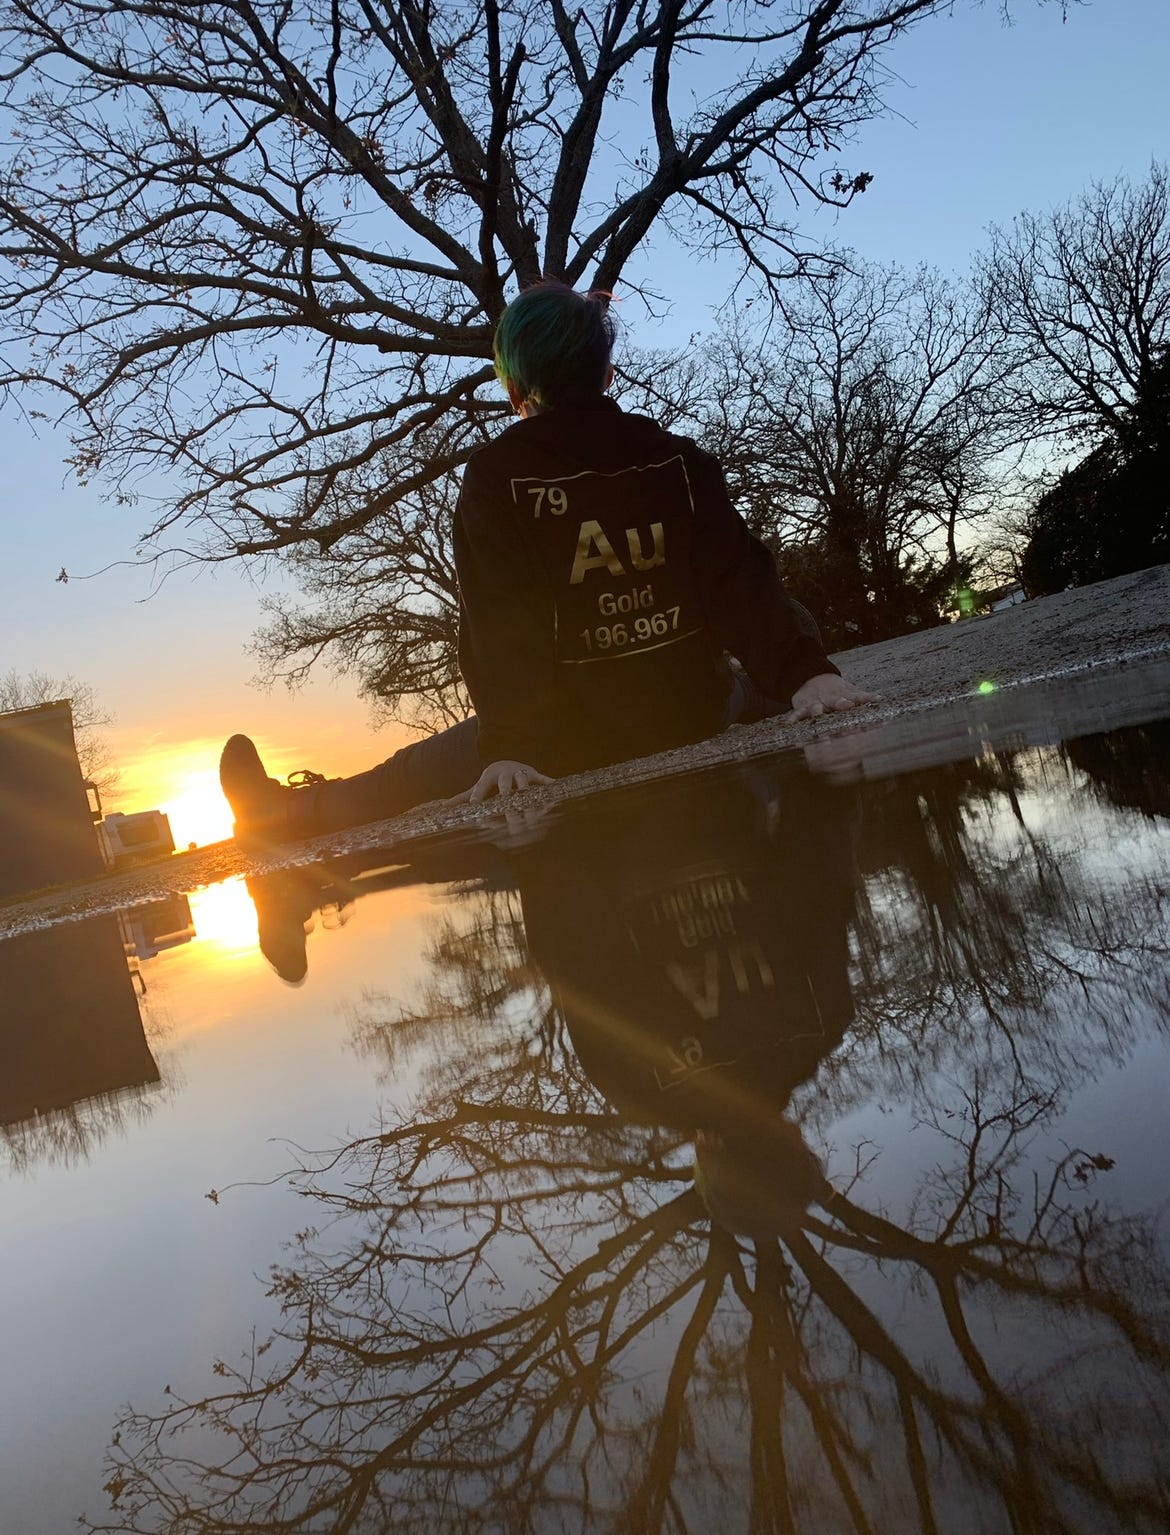 Lyric, sits watching a sunset, next to a puddle, reflecting back their green hair, and black sweater with an AU gold periodic table element in gold lettering on the back reflecting with bare trees in the puddle like a mirror